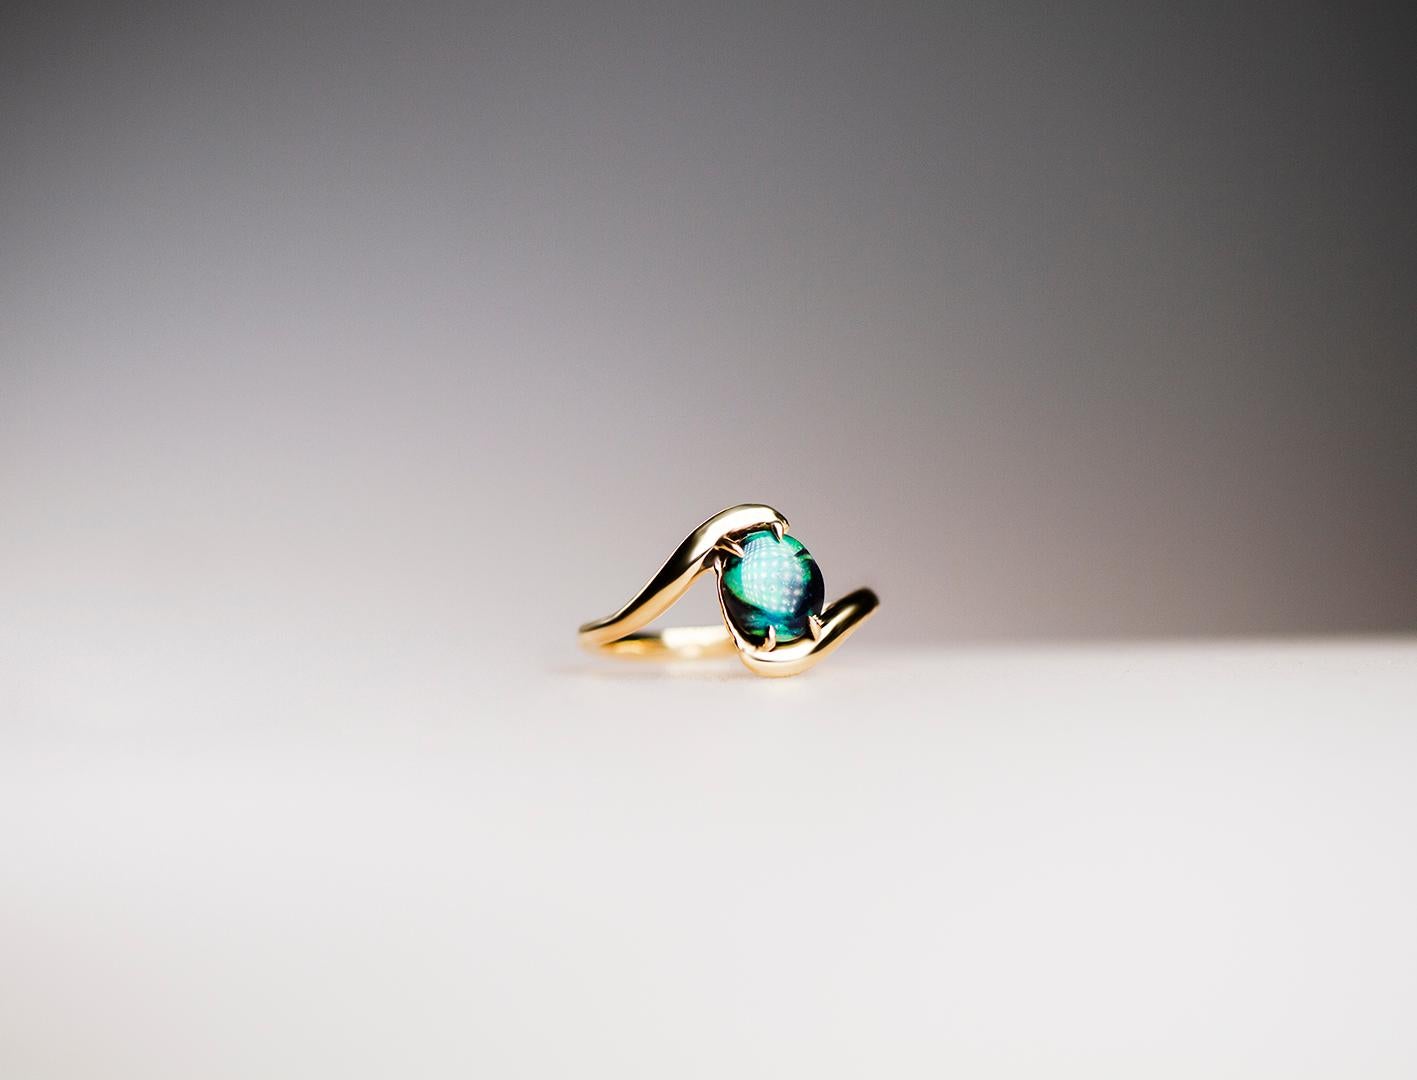 D.O.W. OOAK Opal Ring by St Desiderata

Modeled in wax and made in solid 14k yellow gold and OOAK opal ethically sourced and cut by Ancients17.
OOAK Opal ring inspired in oceanic textures, this is the DOW, for Deep Ocean Water, the name inspired by